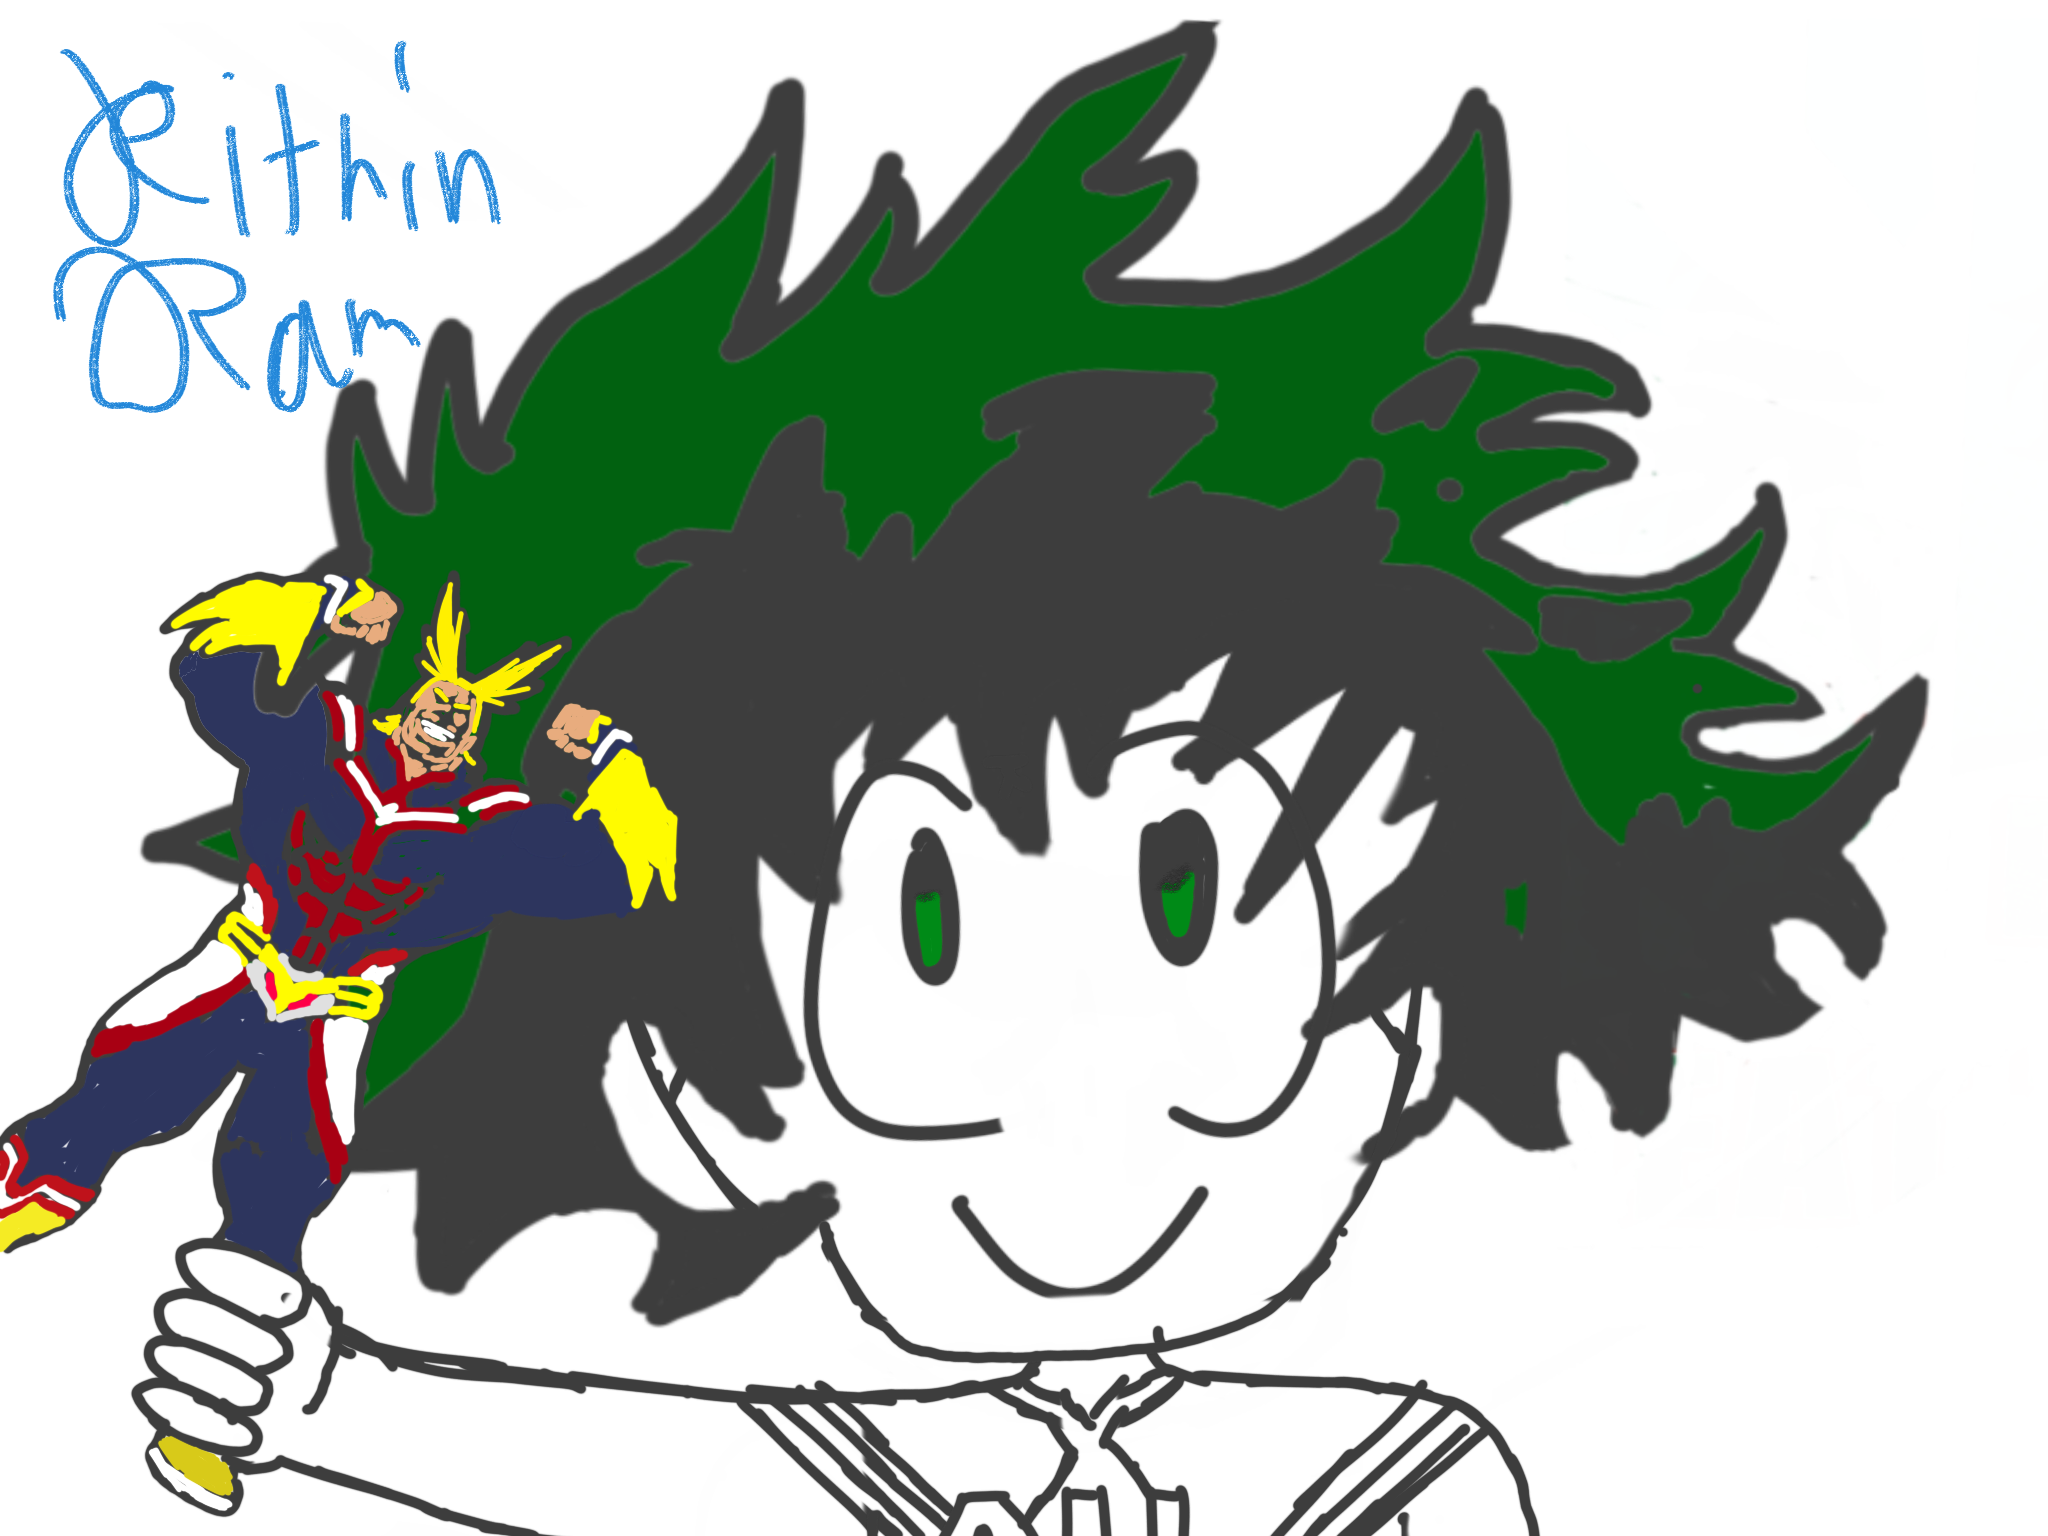 I draw little Deku with all migh action figure(all mighty action figure and deku's hair is copied)